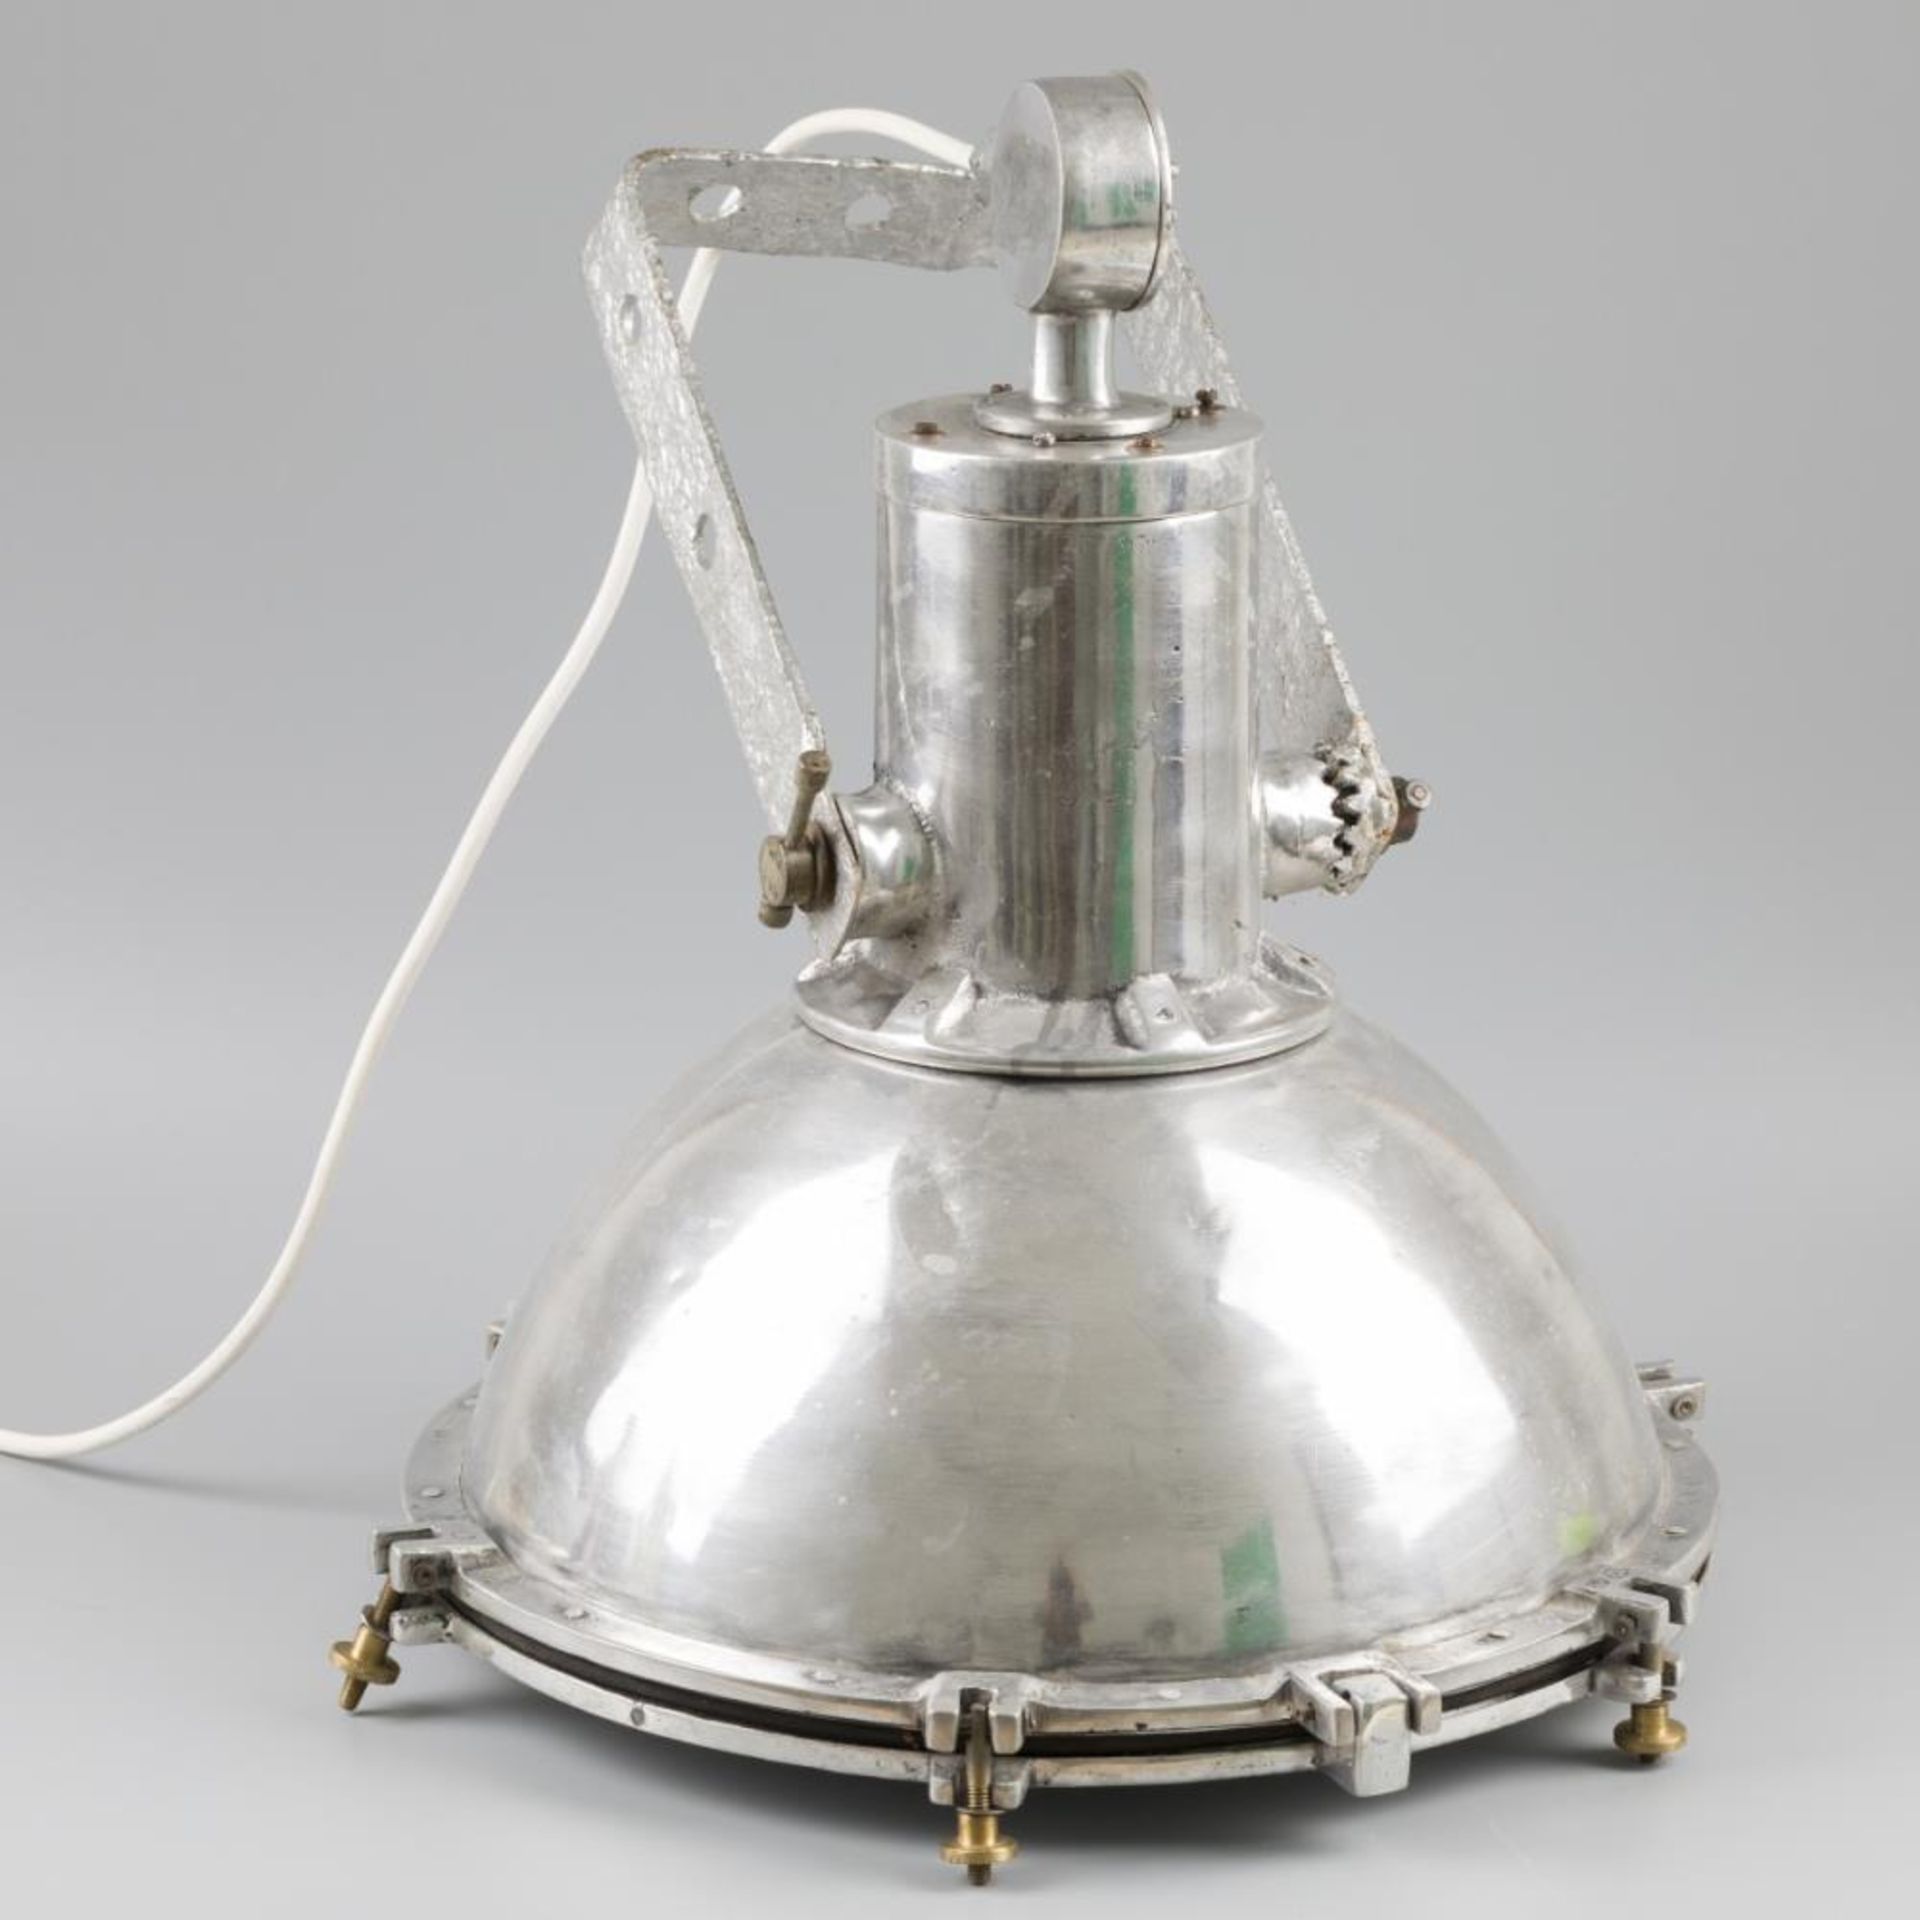 A chromed industrial pendant lamp, 20th century.